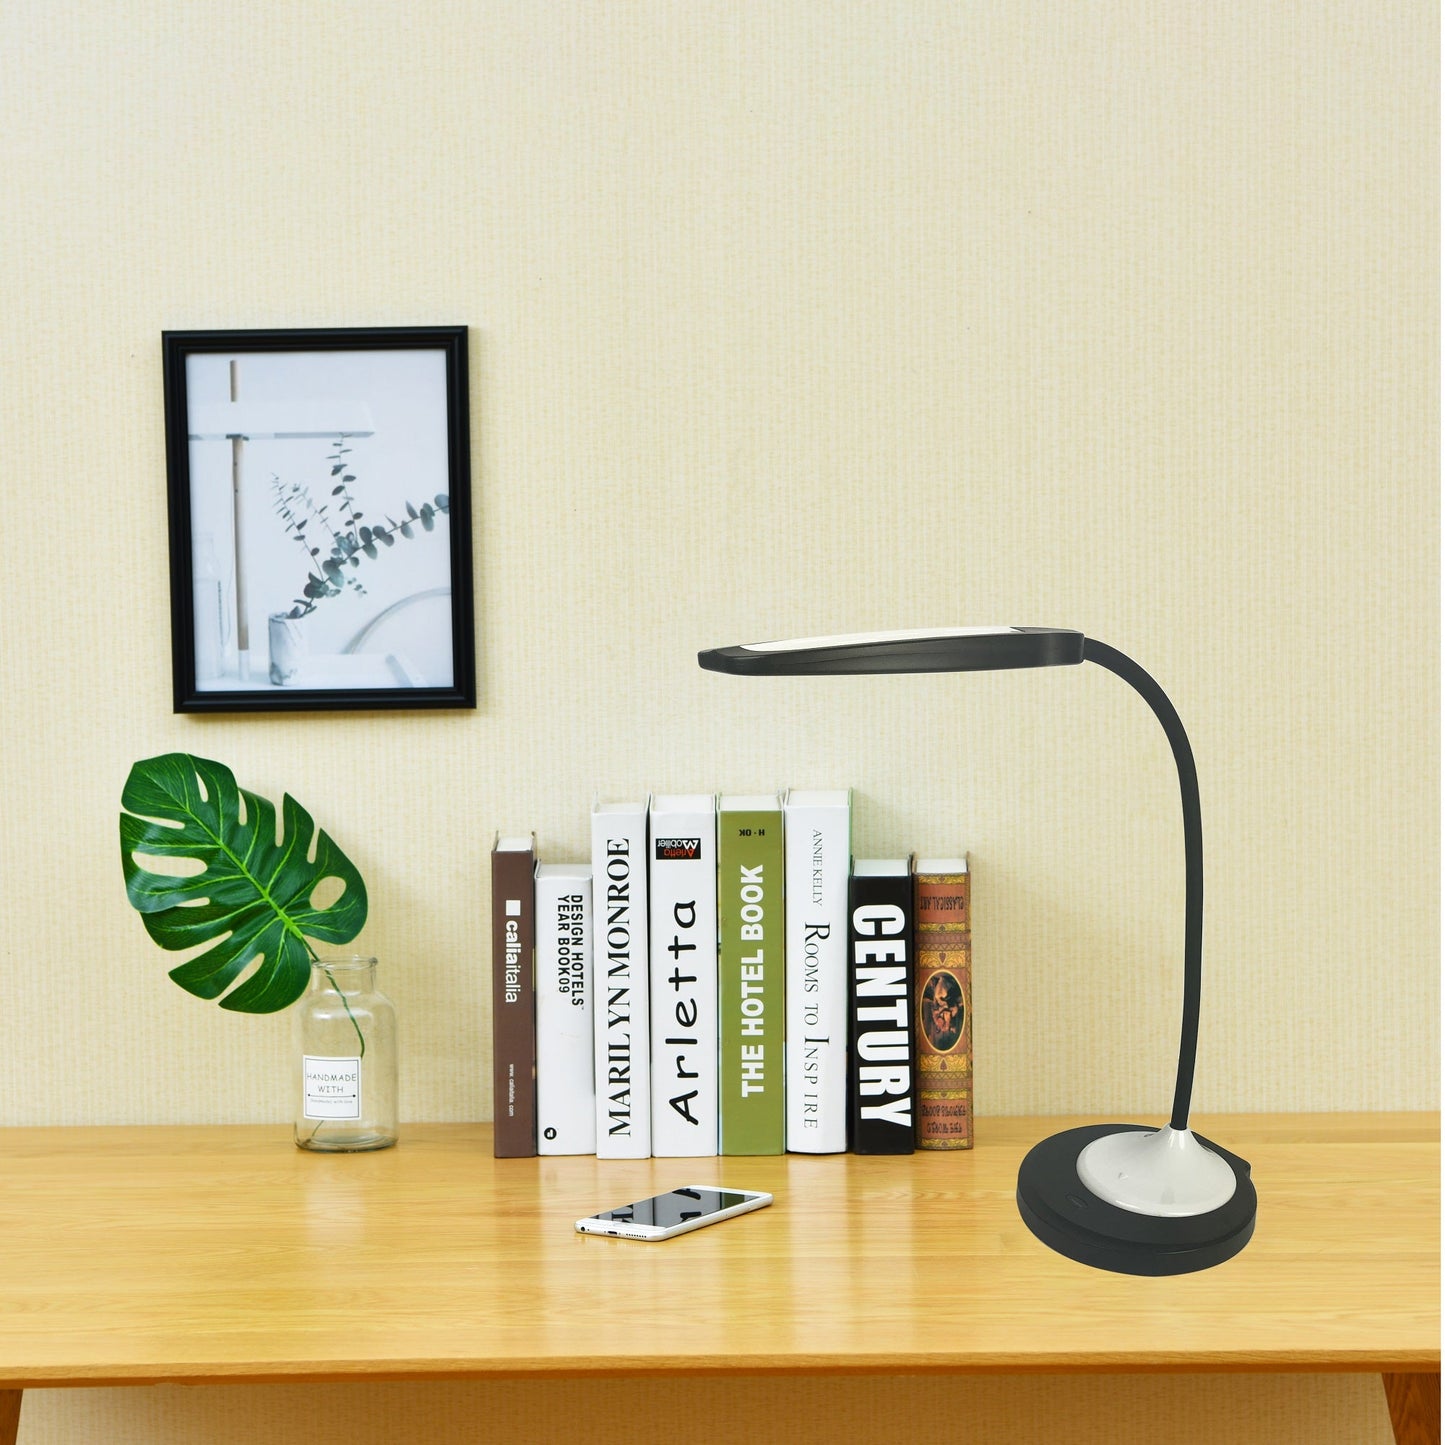 DAC® MP-356 Adjustable LED Desk Lamp/Table Lamp with USB Charging Port, White and Black